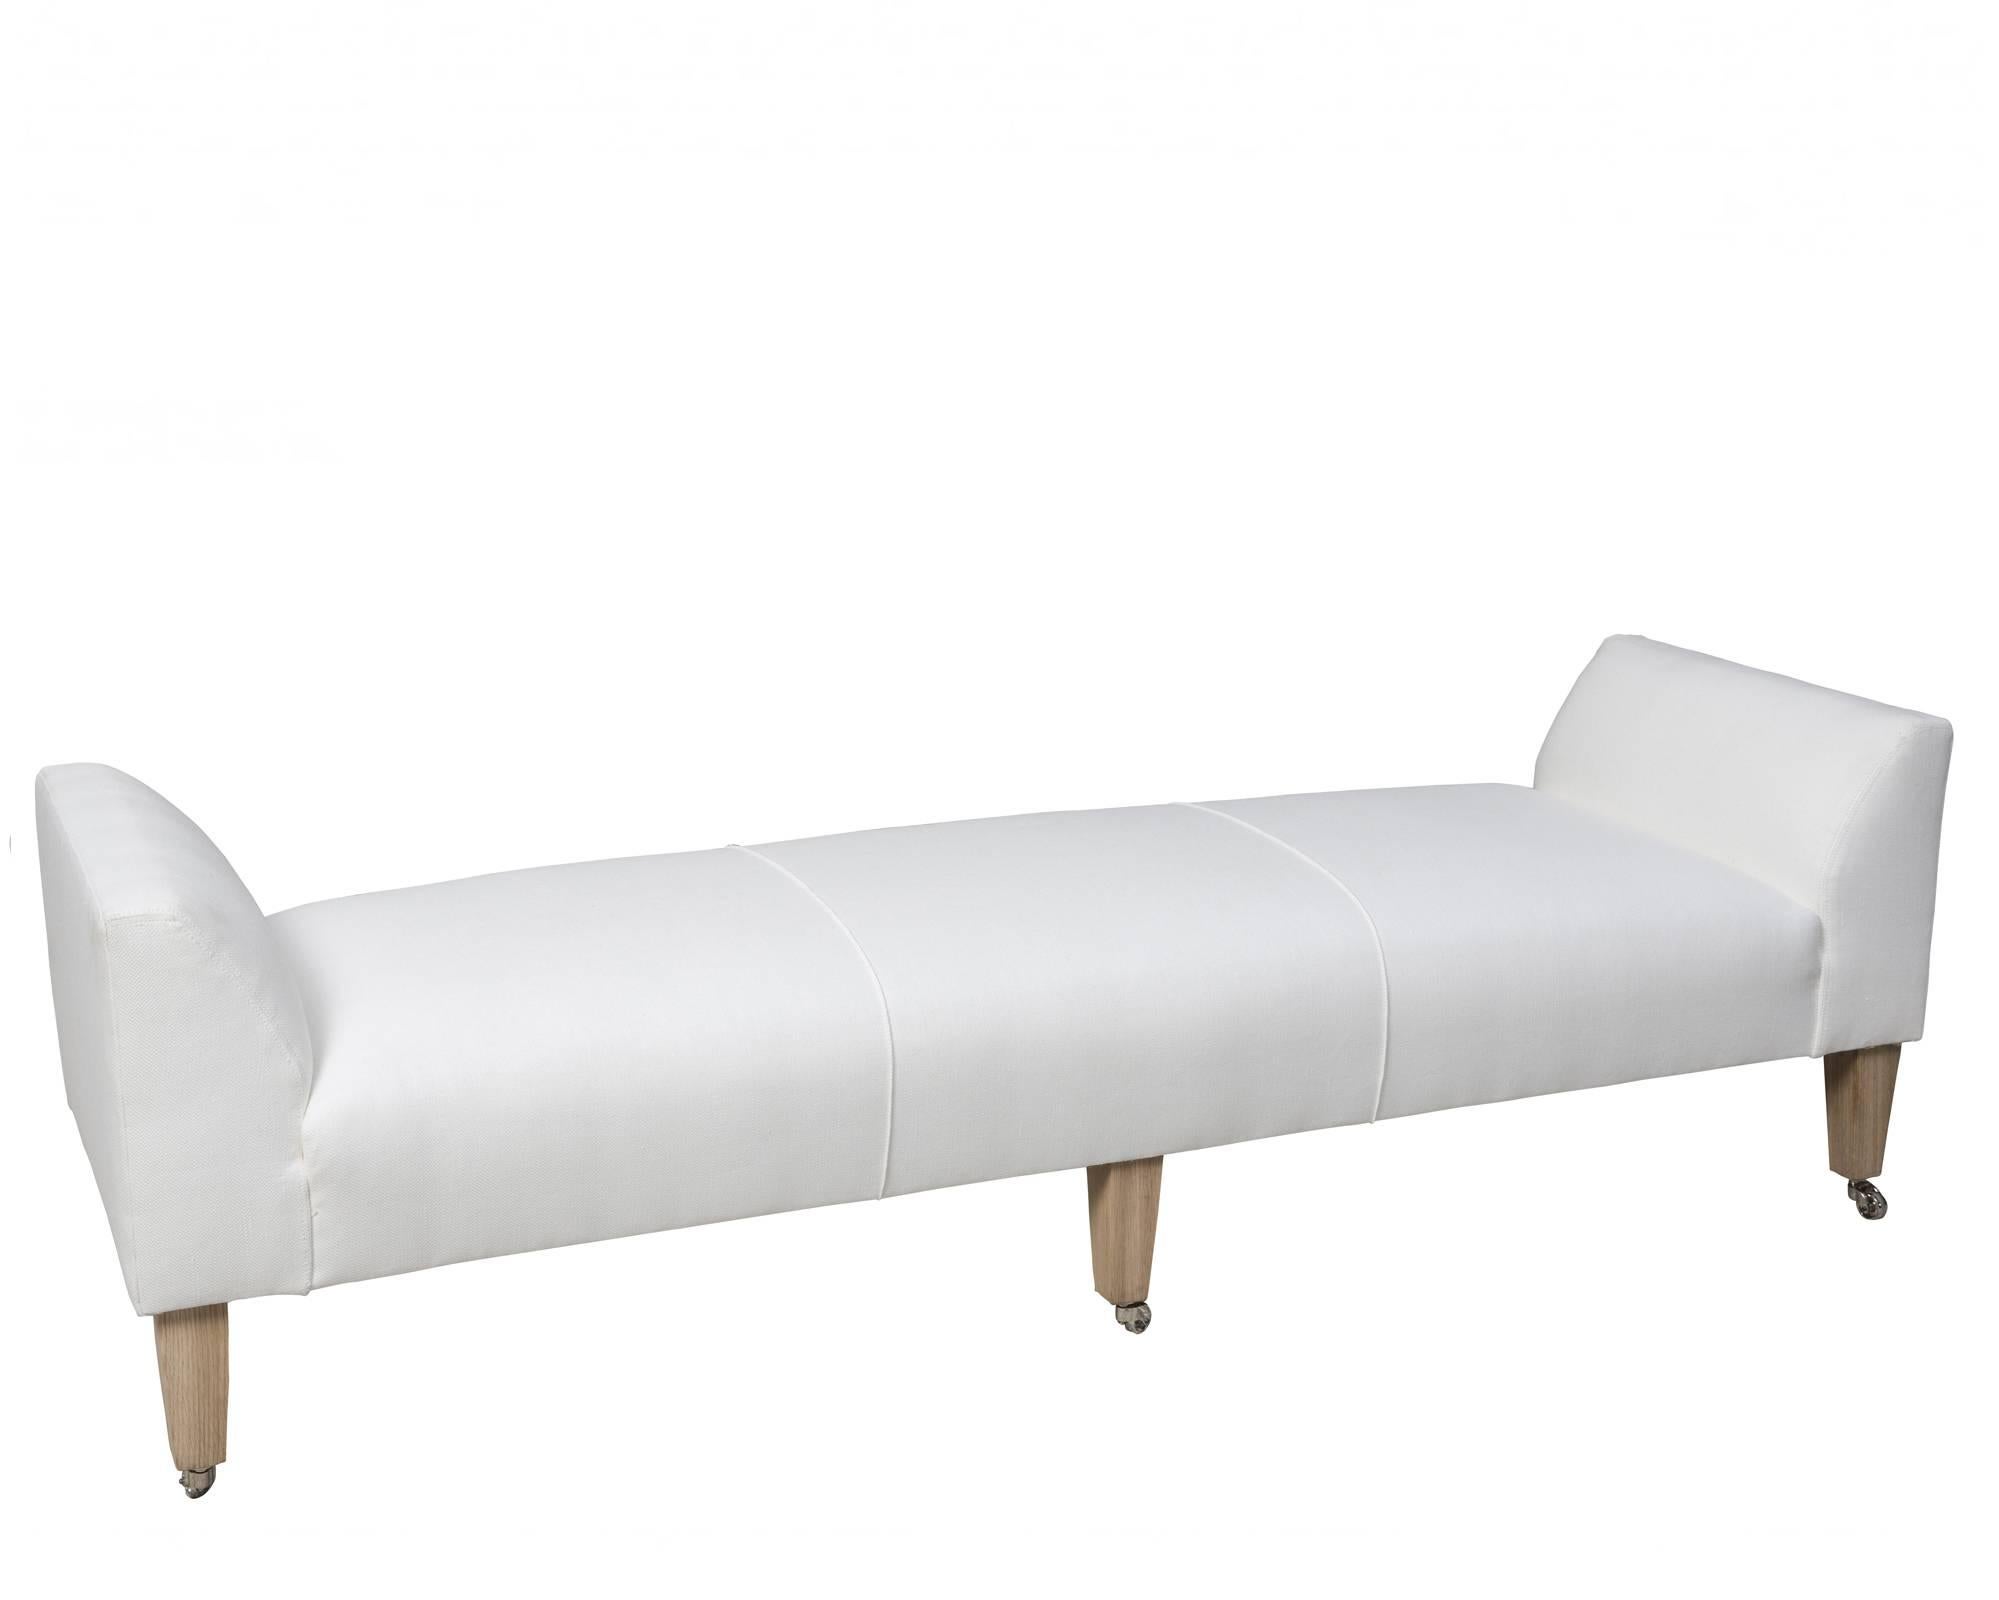 Beautiful upholstered bench
designed by Michael Dawkins.
Various fabrics and custom sizes are available.
100% made in the U.S.
Price is for C.O.M. or basic linen.